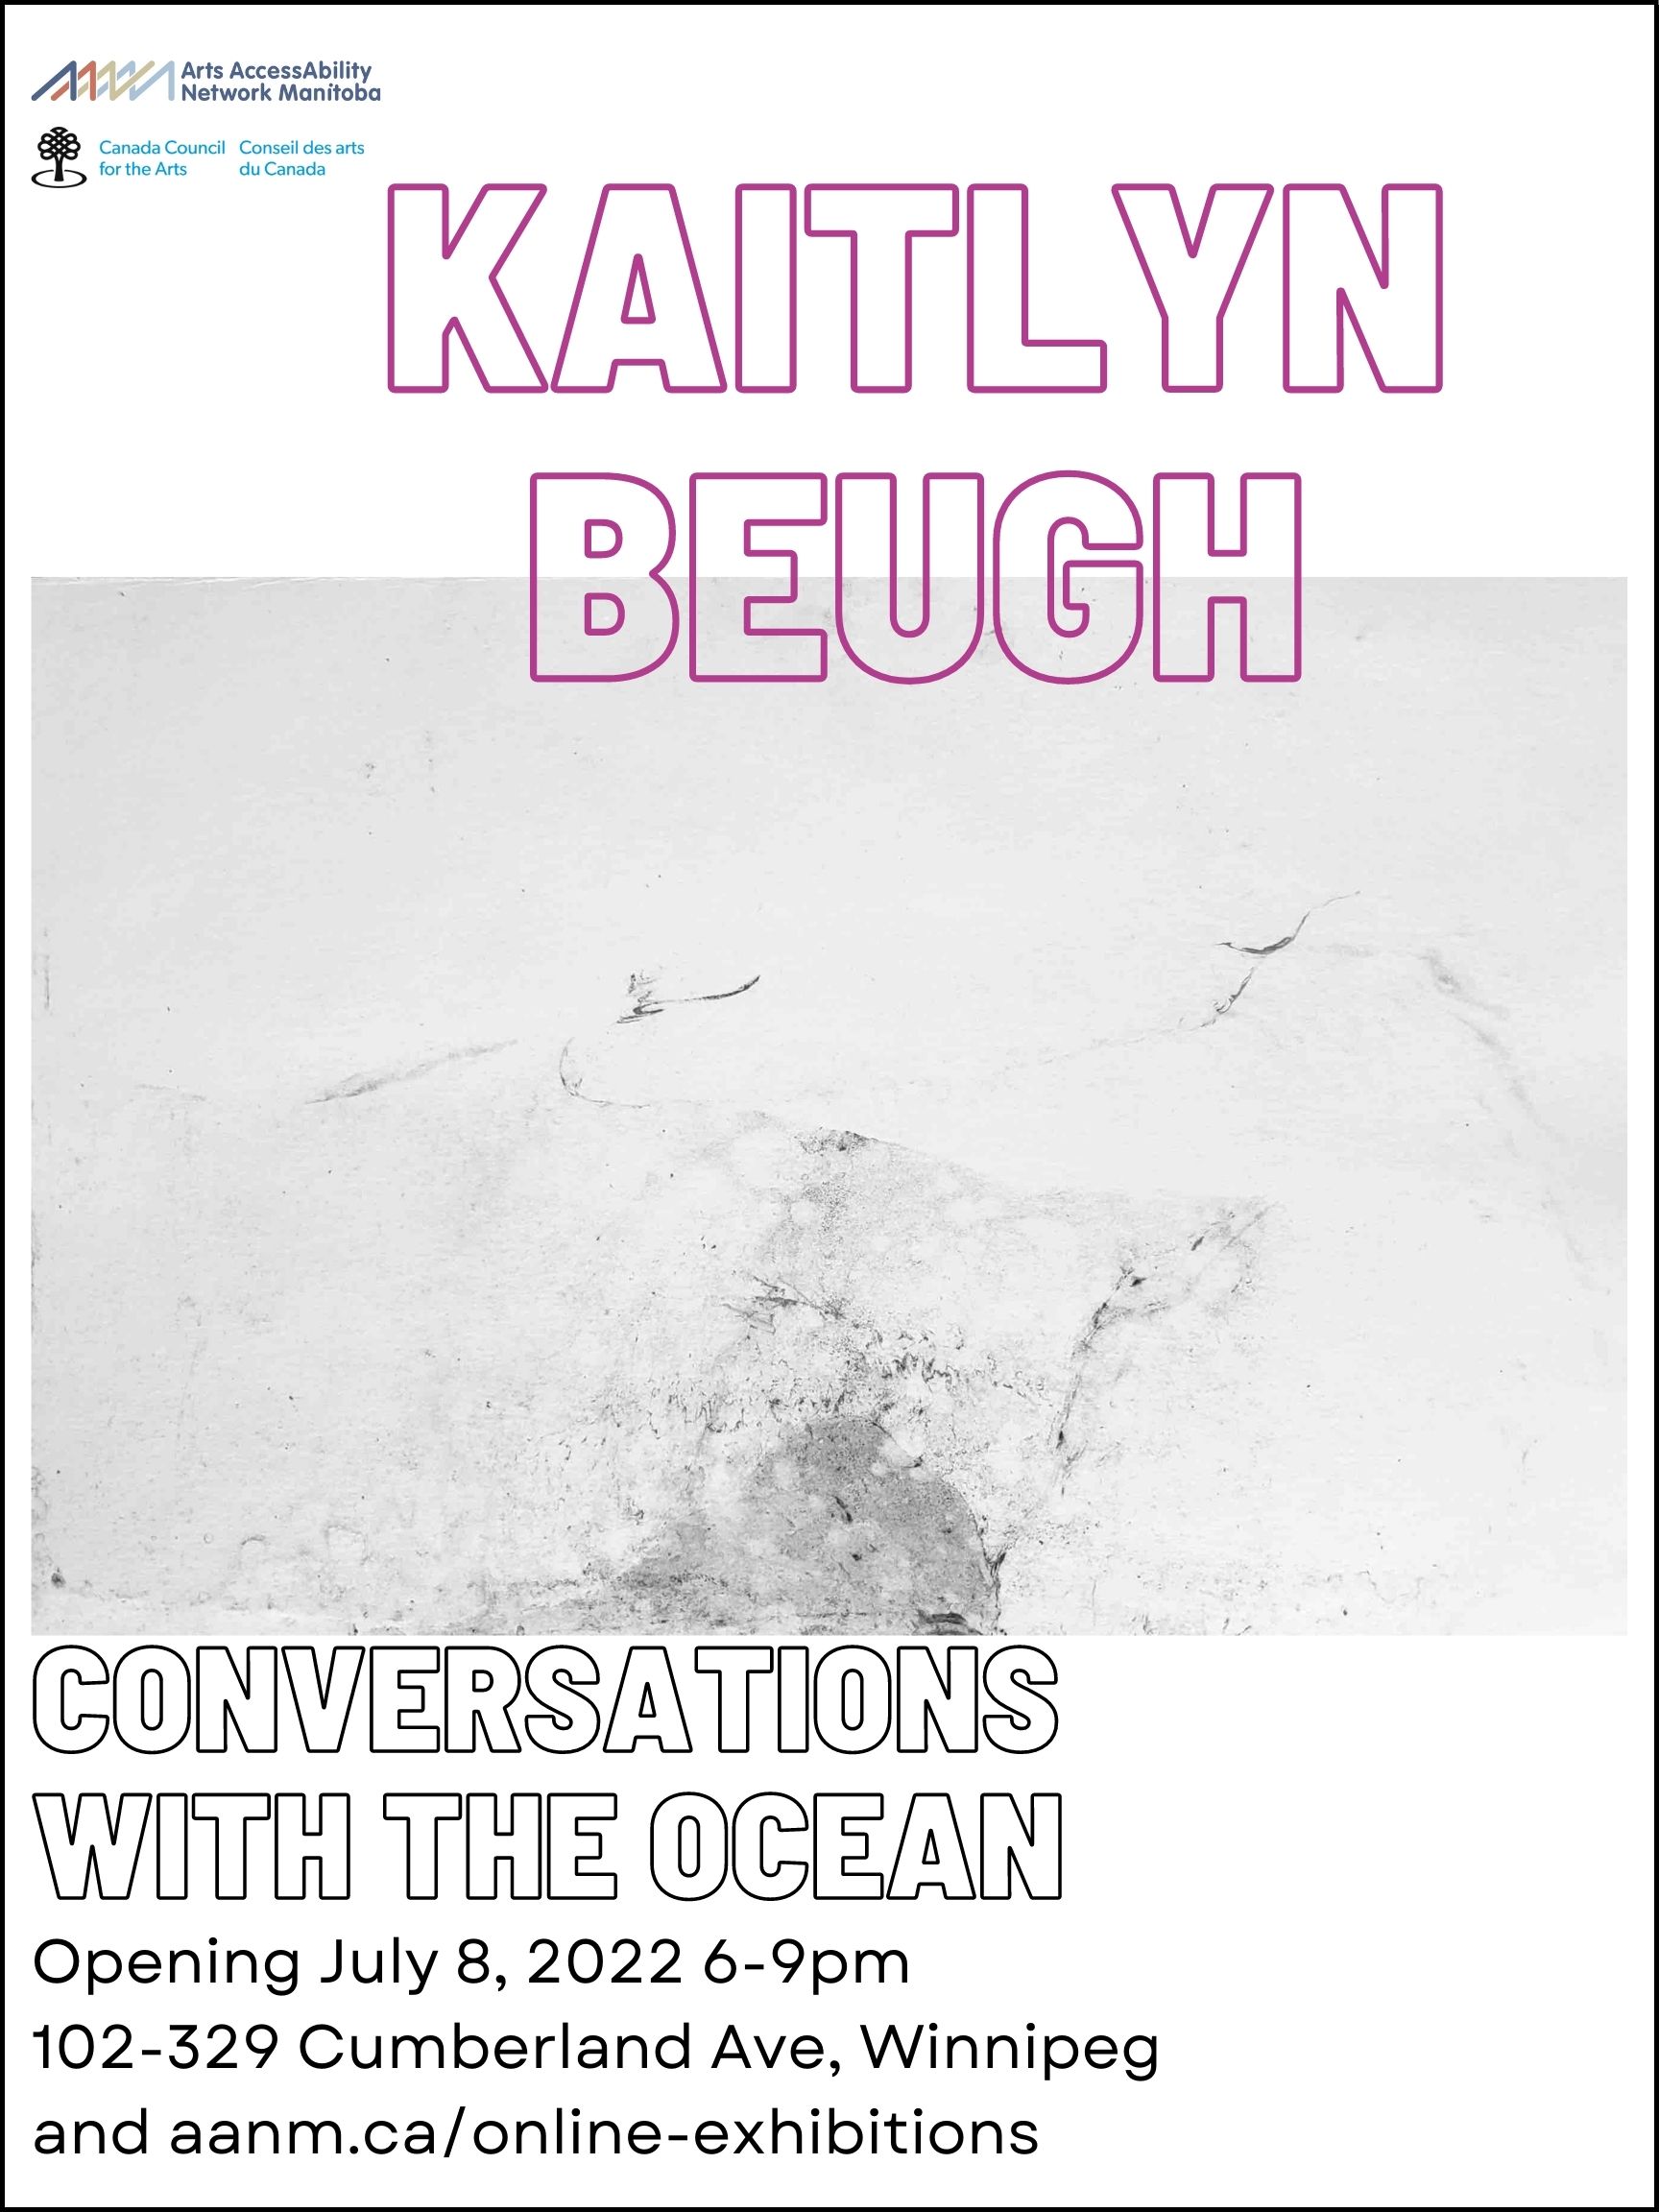 Conversations with the Ocean – Kaitlyn Beugh